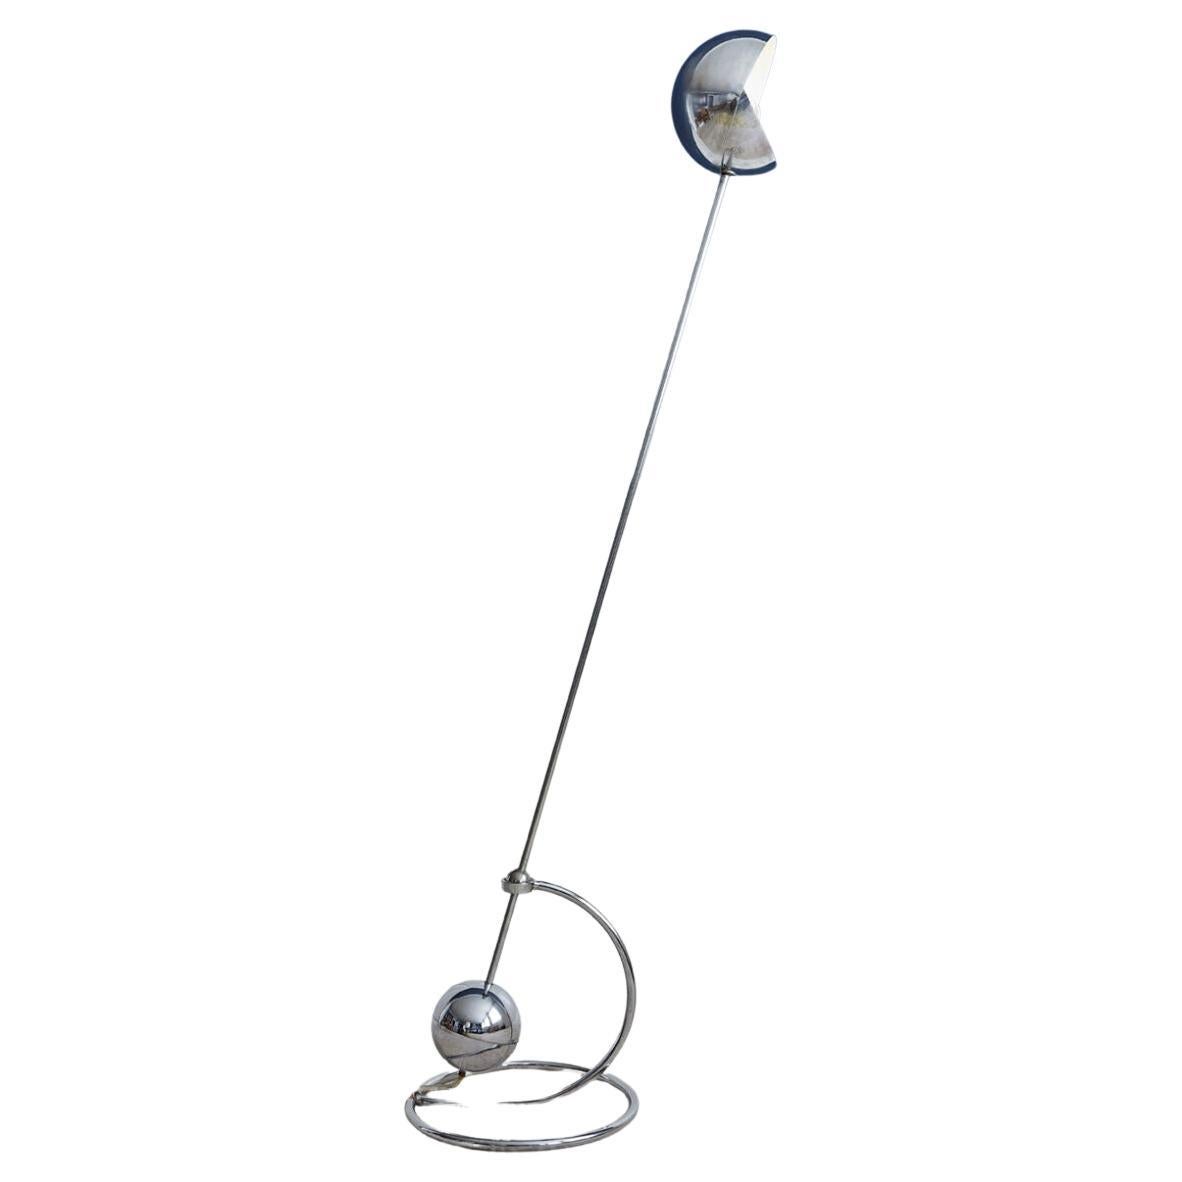 Vintage Paolo Tilche '3s' Adjustable Floor Lamp in Chrome Metal, Italy, 1970s For Sale